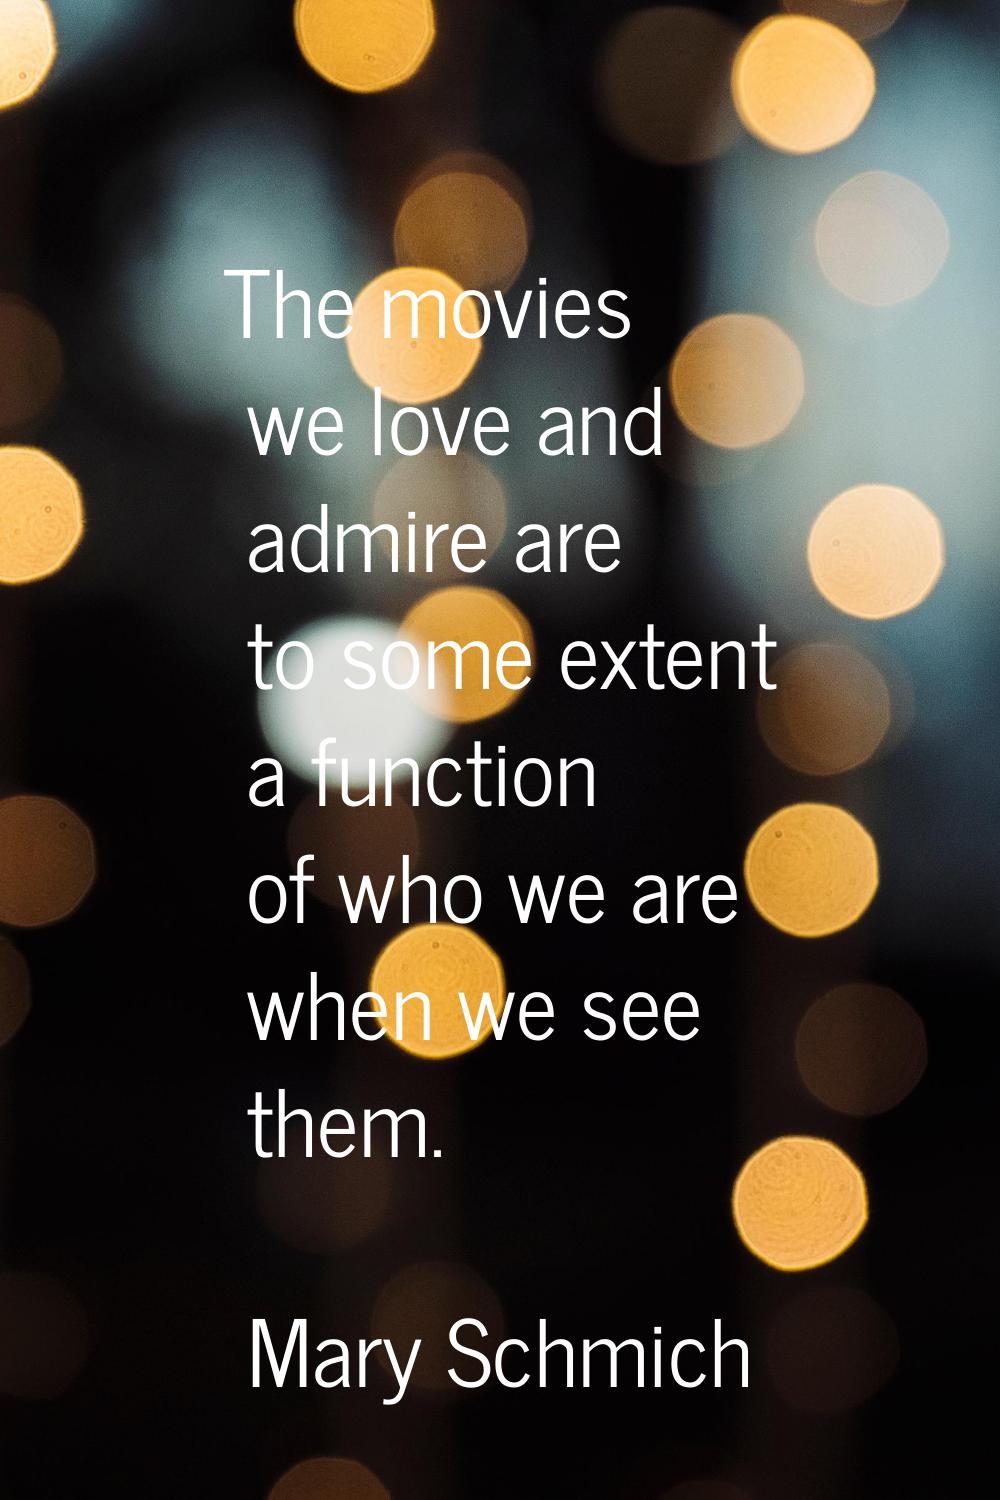 The movies we love and admire are to some extent a function of who we are when we see them.